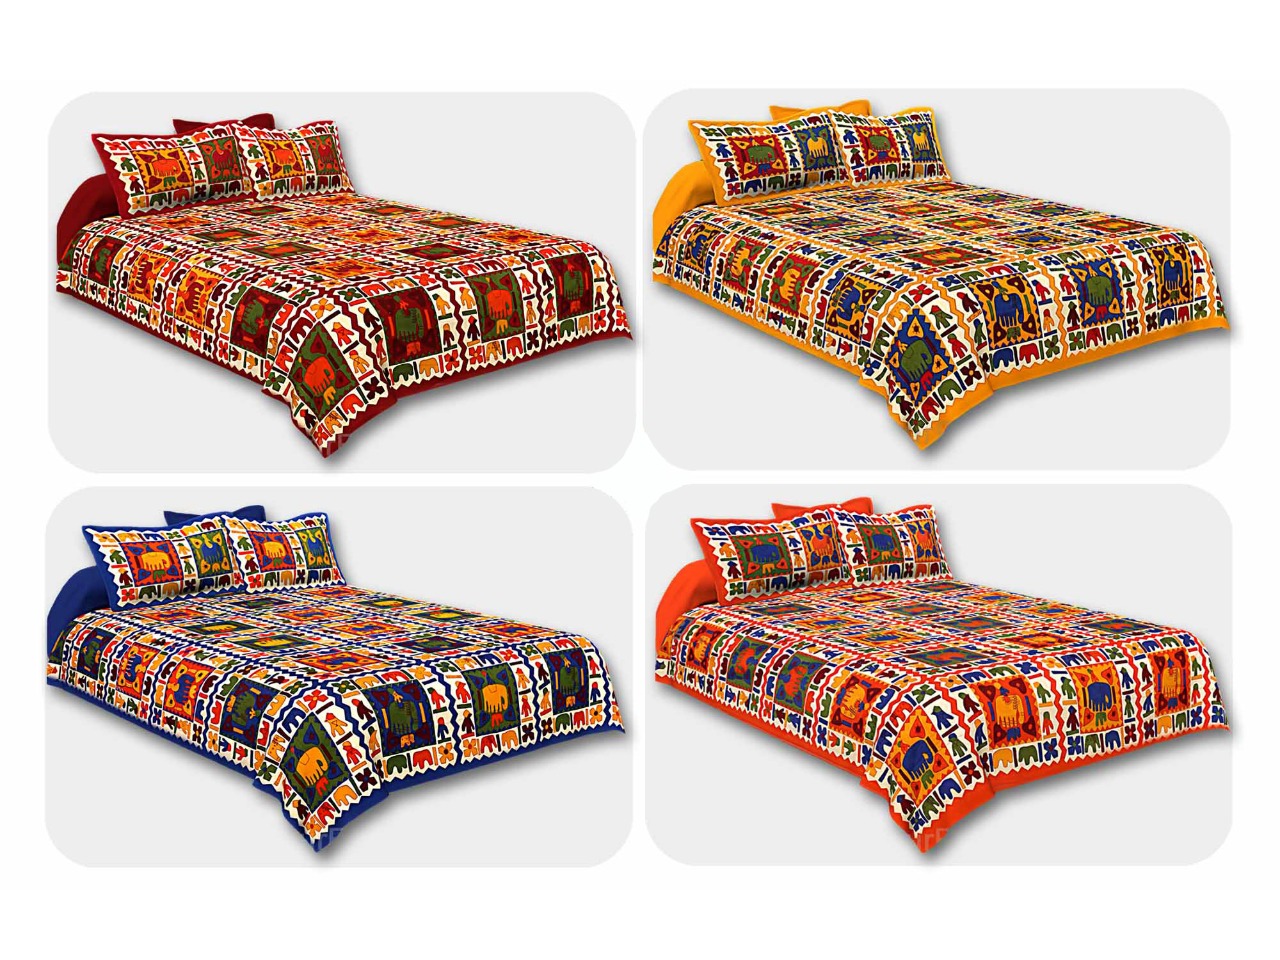 COMBO114 Beautiful Multicolor 4 Bedsheet + 8 Pillow Cover